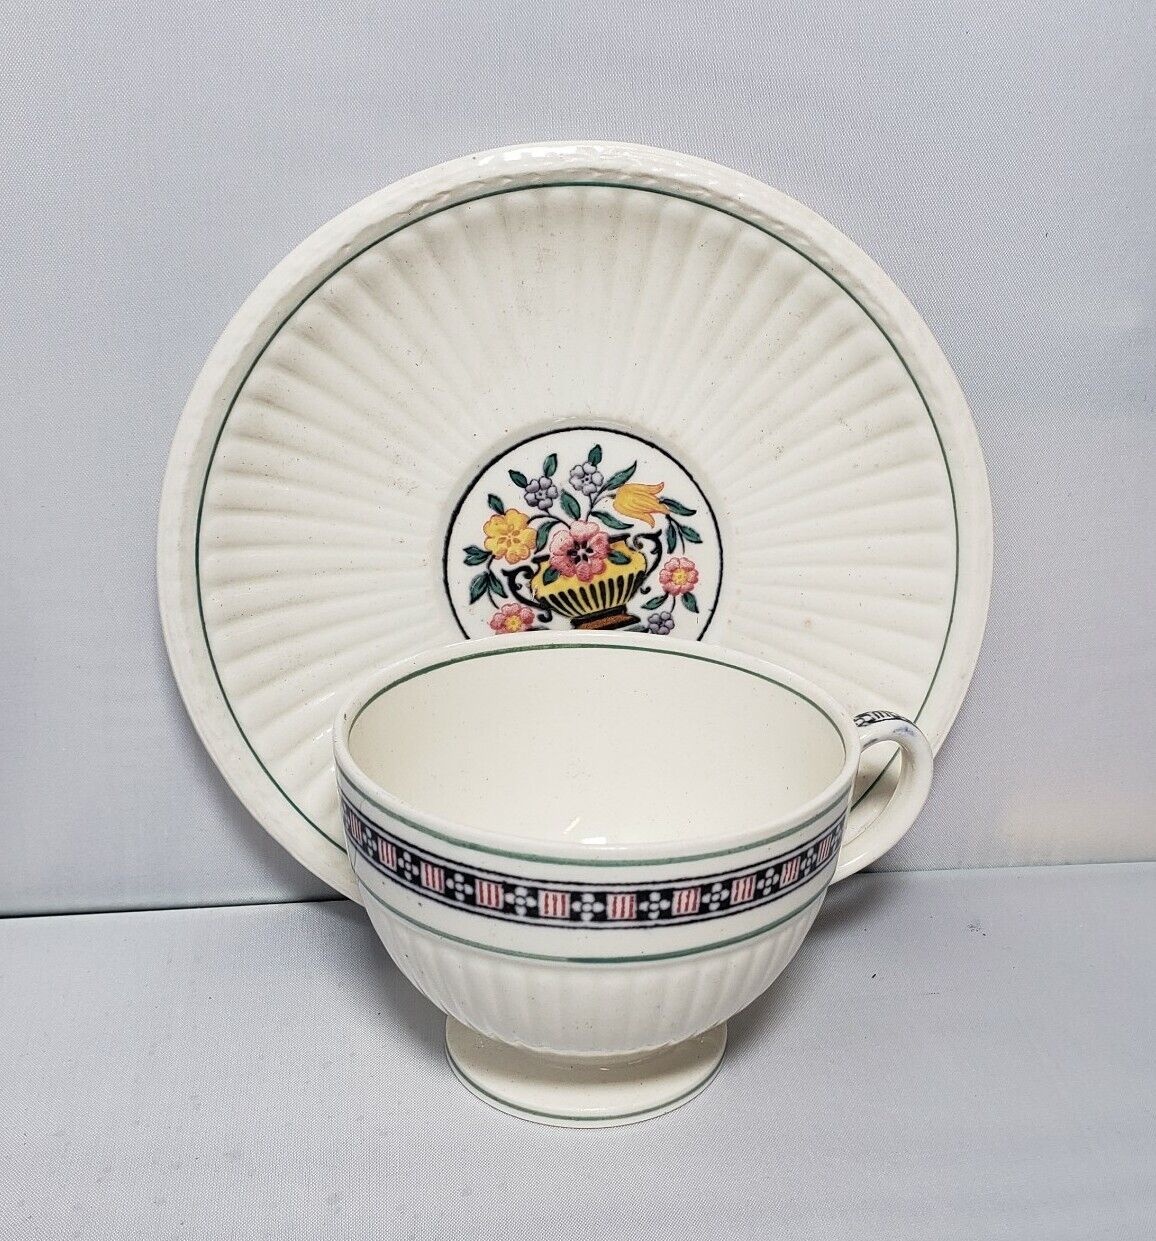 Antique Wedgewood Trentham Teacup And Saucer